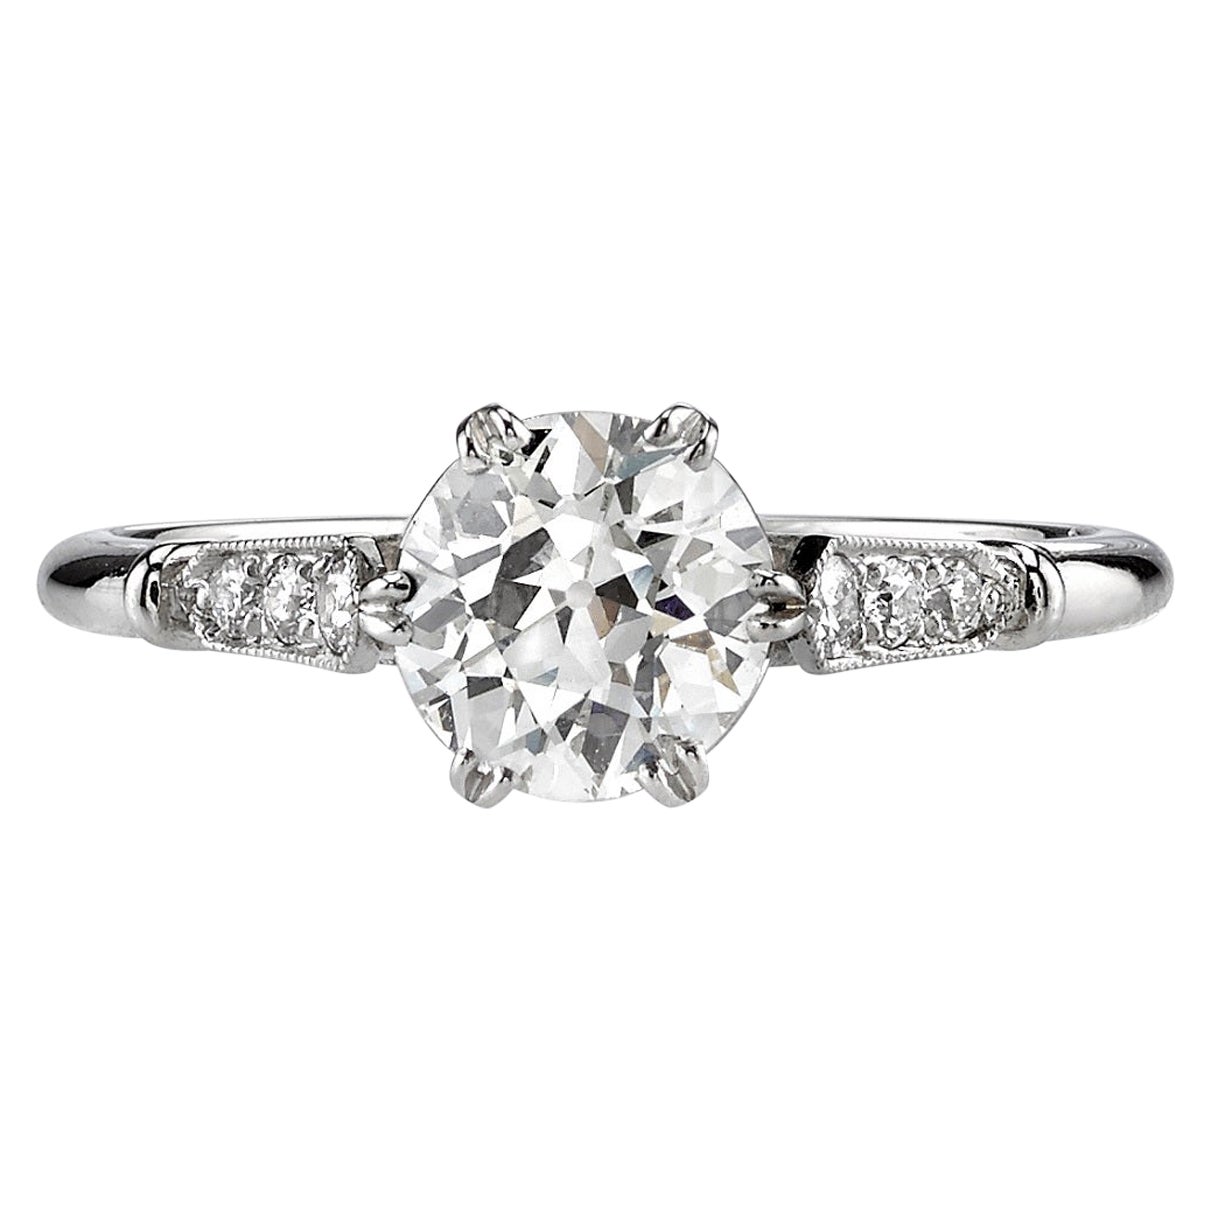 Handcrafted Carmen Old European Cut Diamond Ring by Single Stone